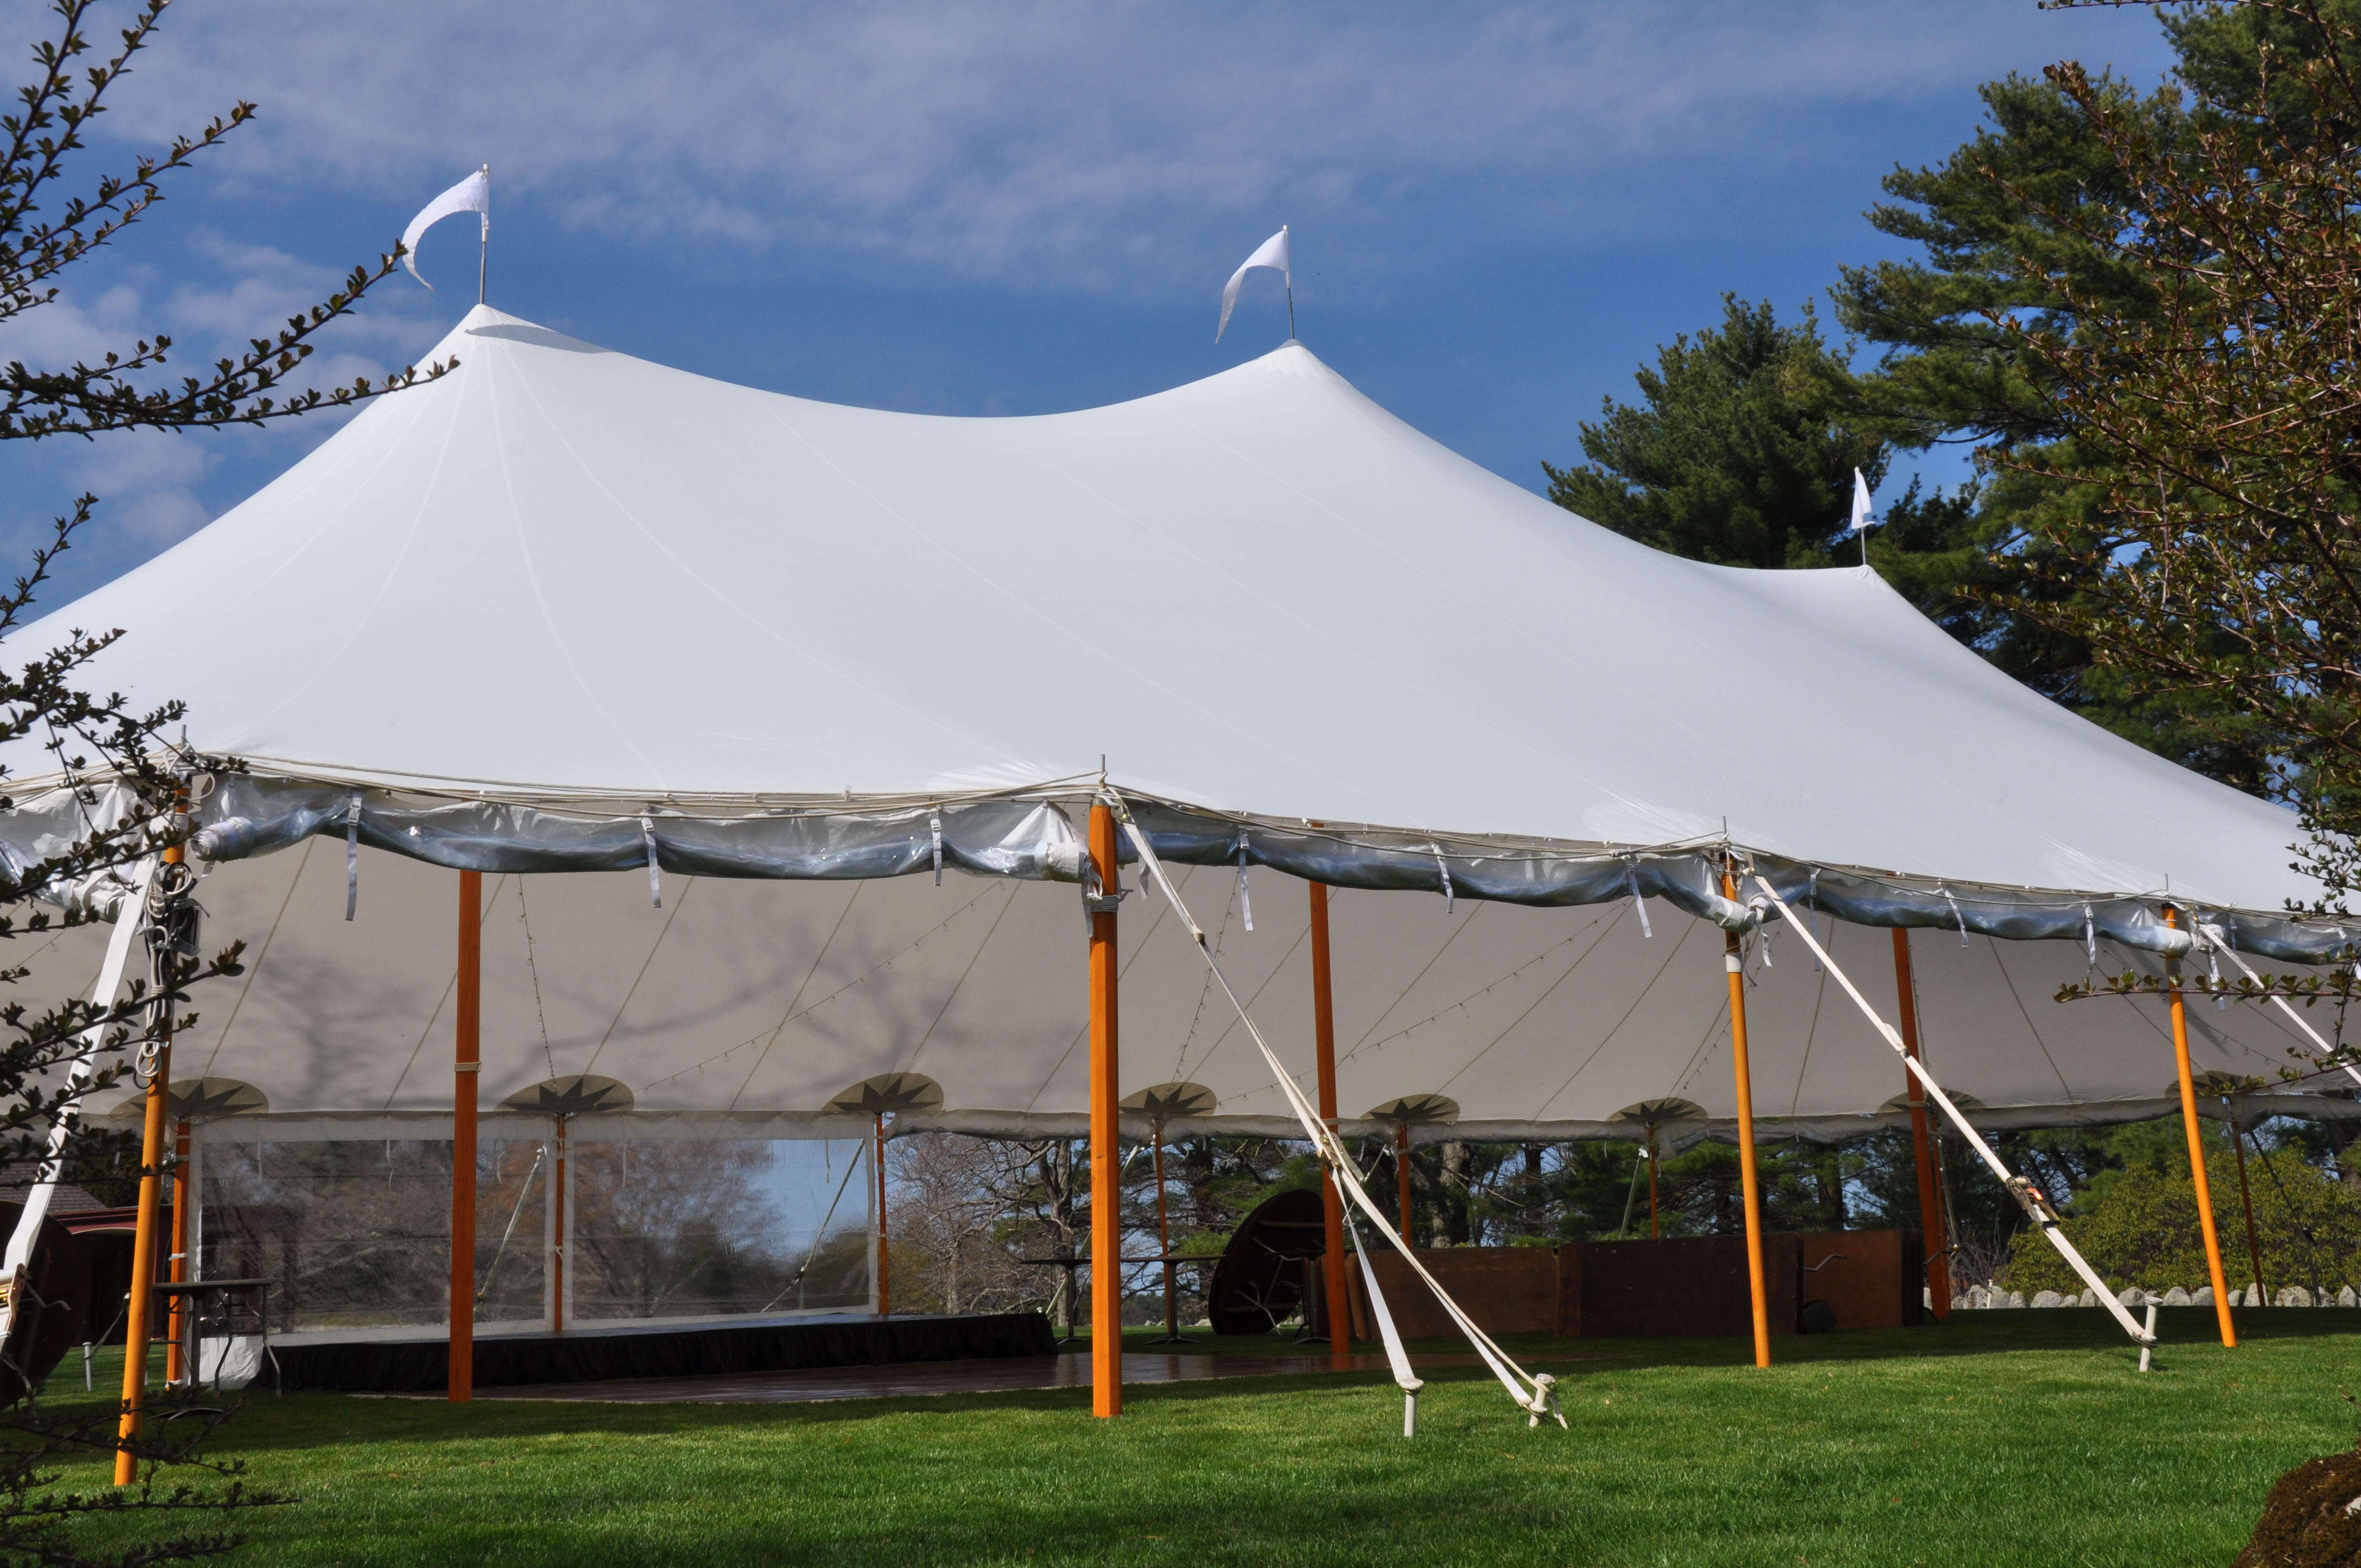 Chemicus Vechter gegevens 44x83 Tidewater Sailcloth Tent at Moraine Farm - Tent and Party Rentals  Company